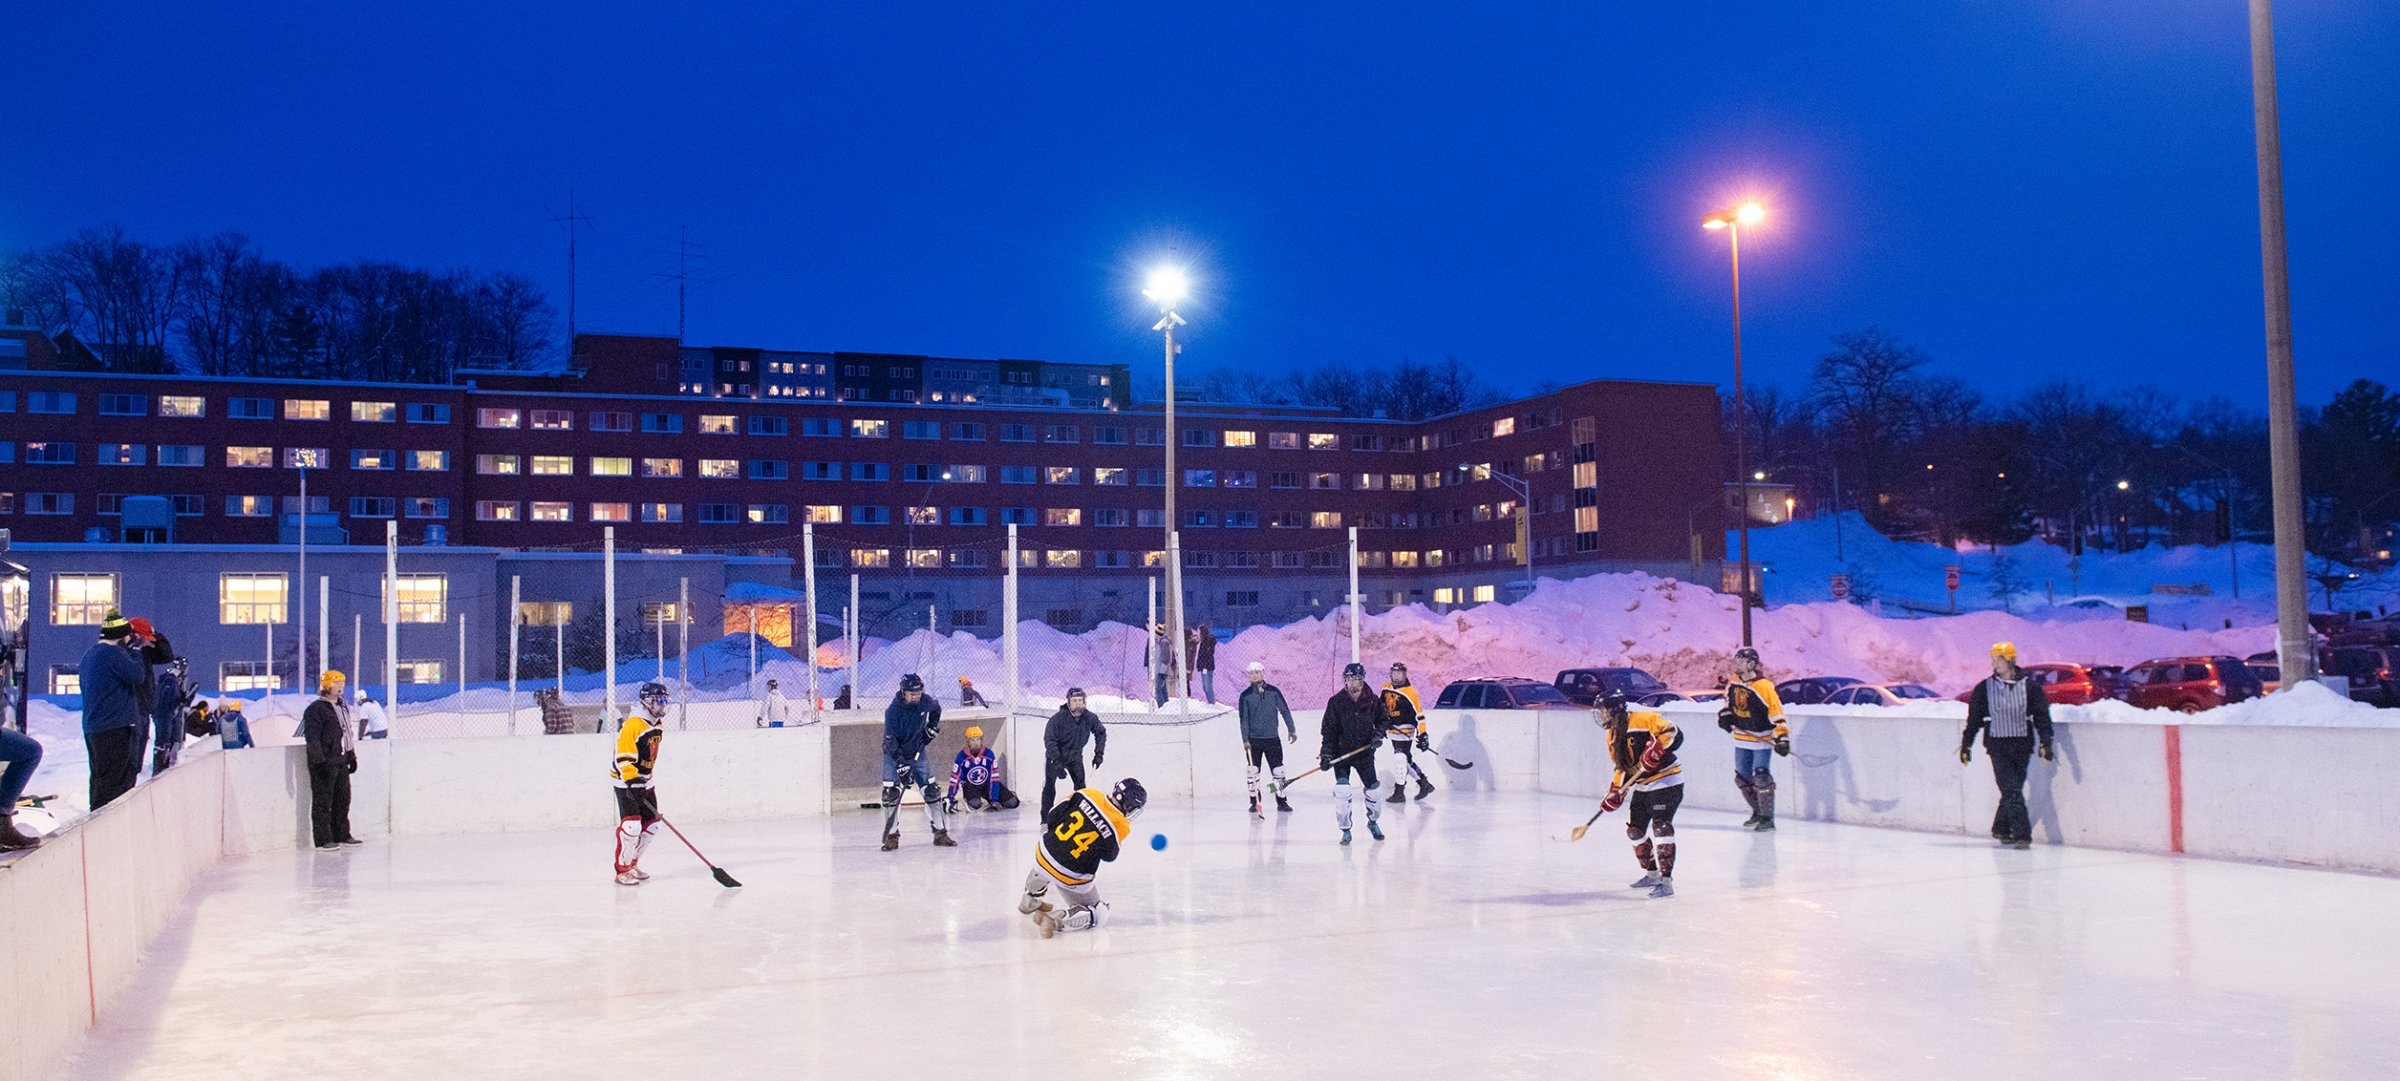 A broomball match at dusk